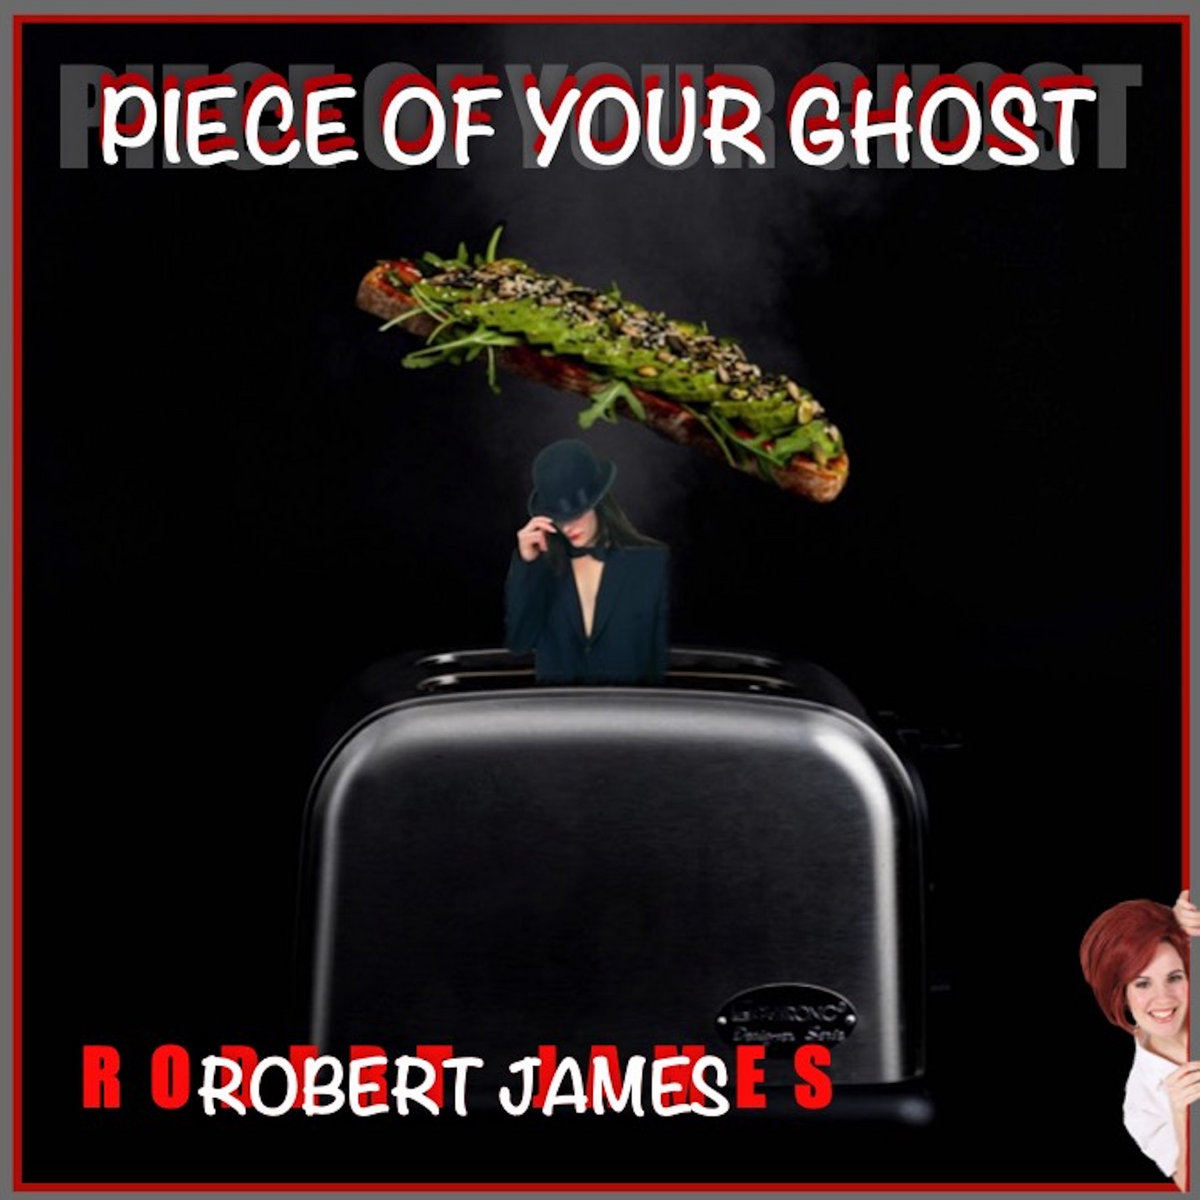 Album cover artwork for Robert James's Piece Of Your Ghost